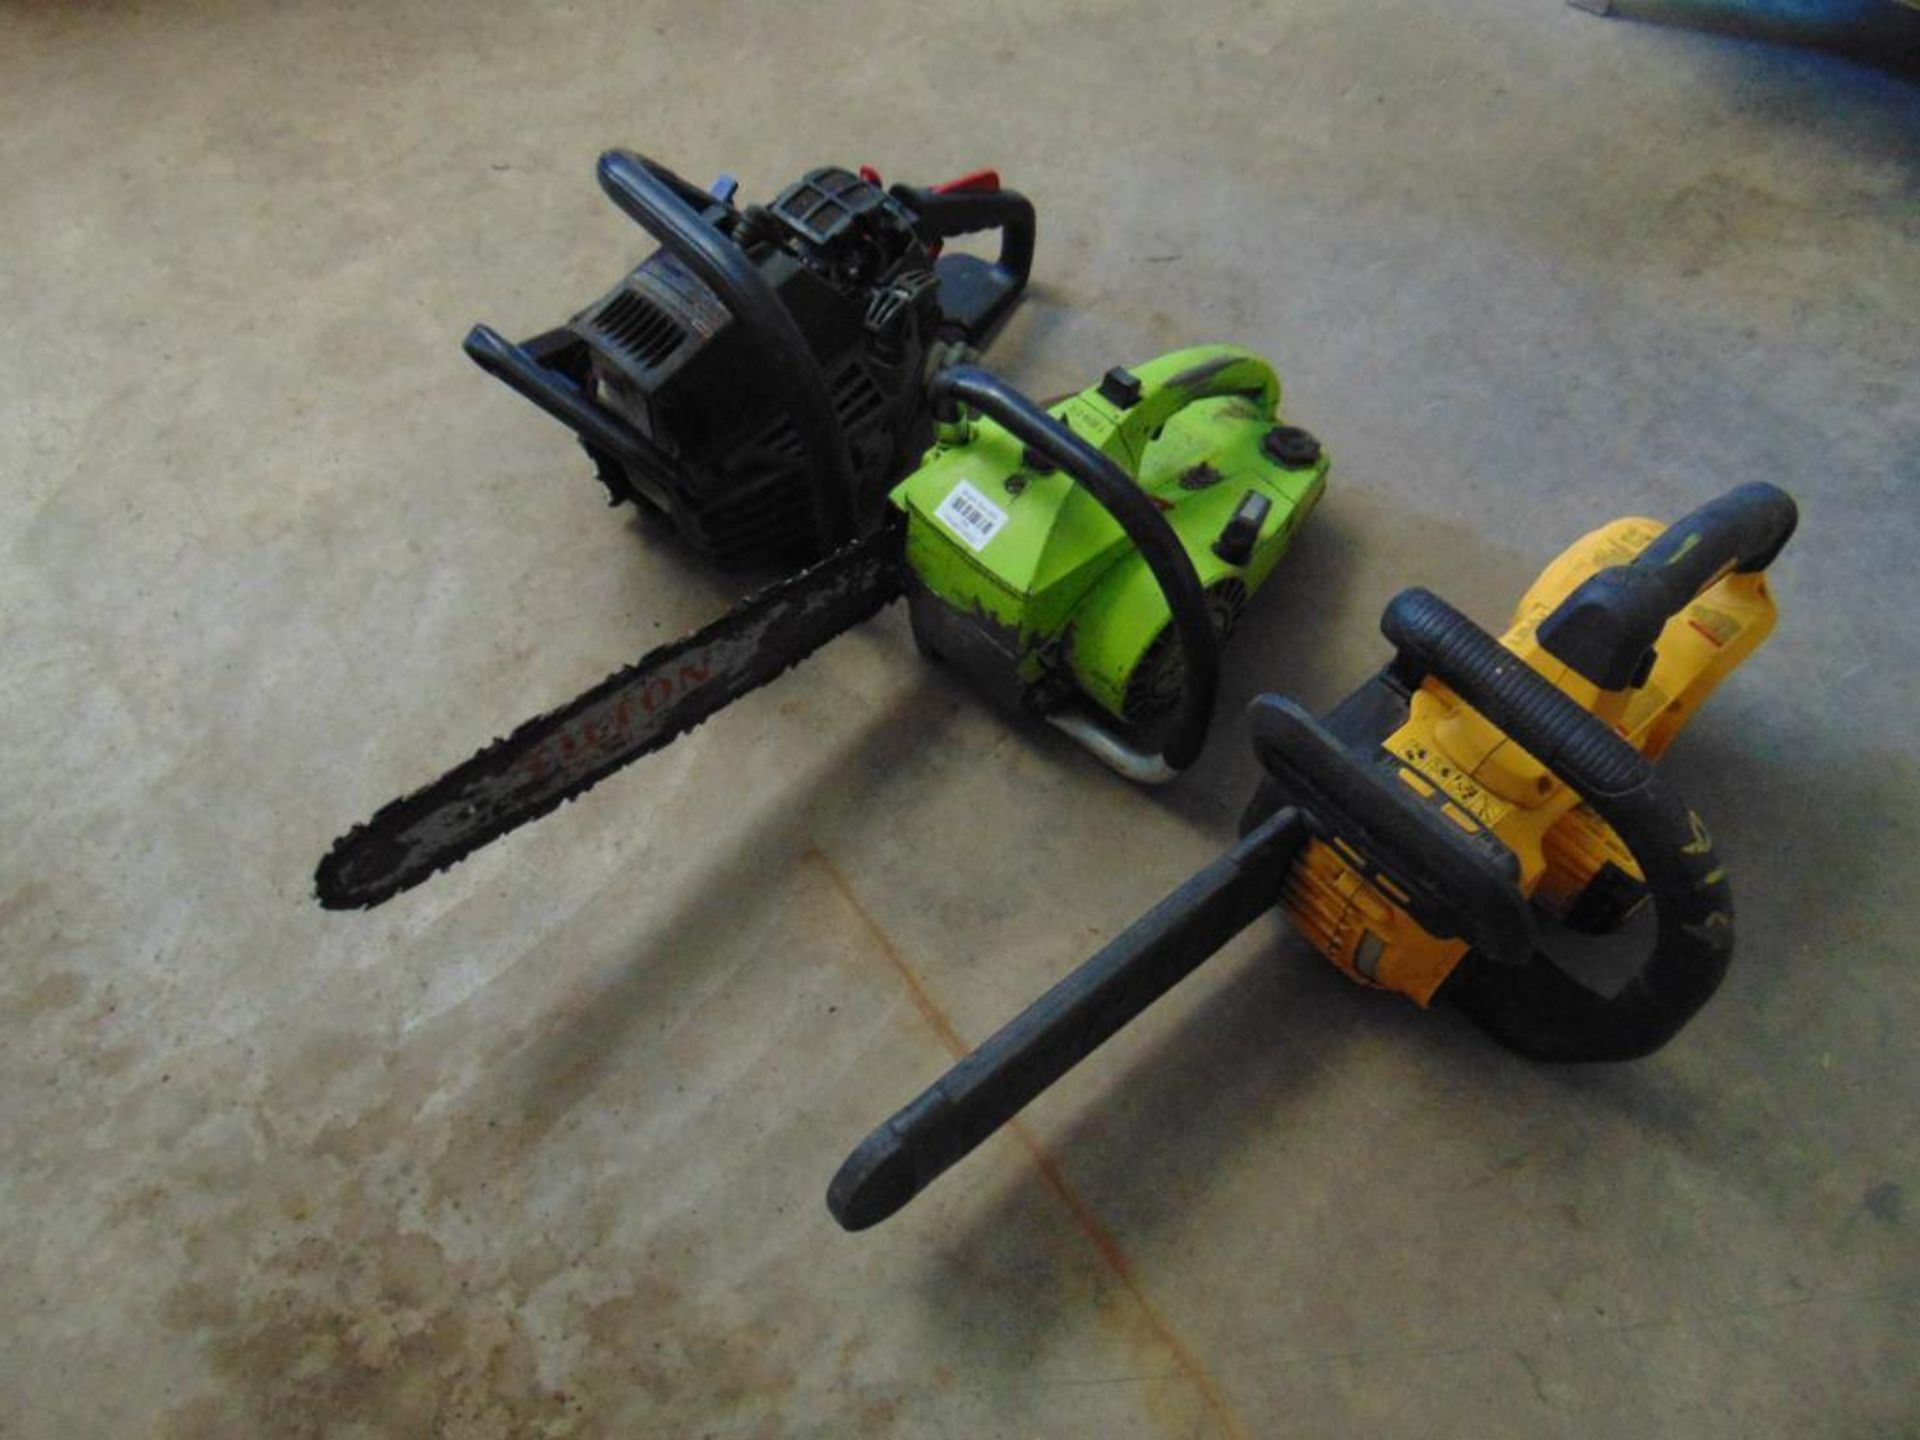 Lot of Parts Chainsaws